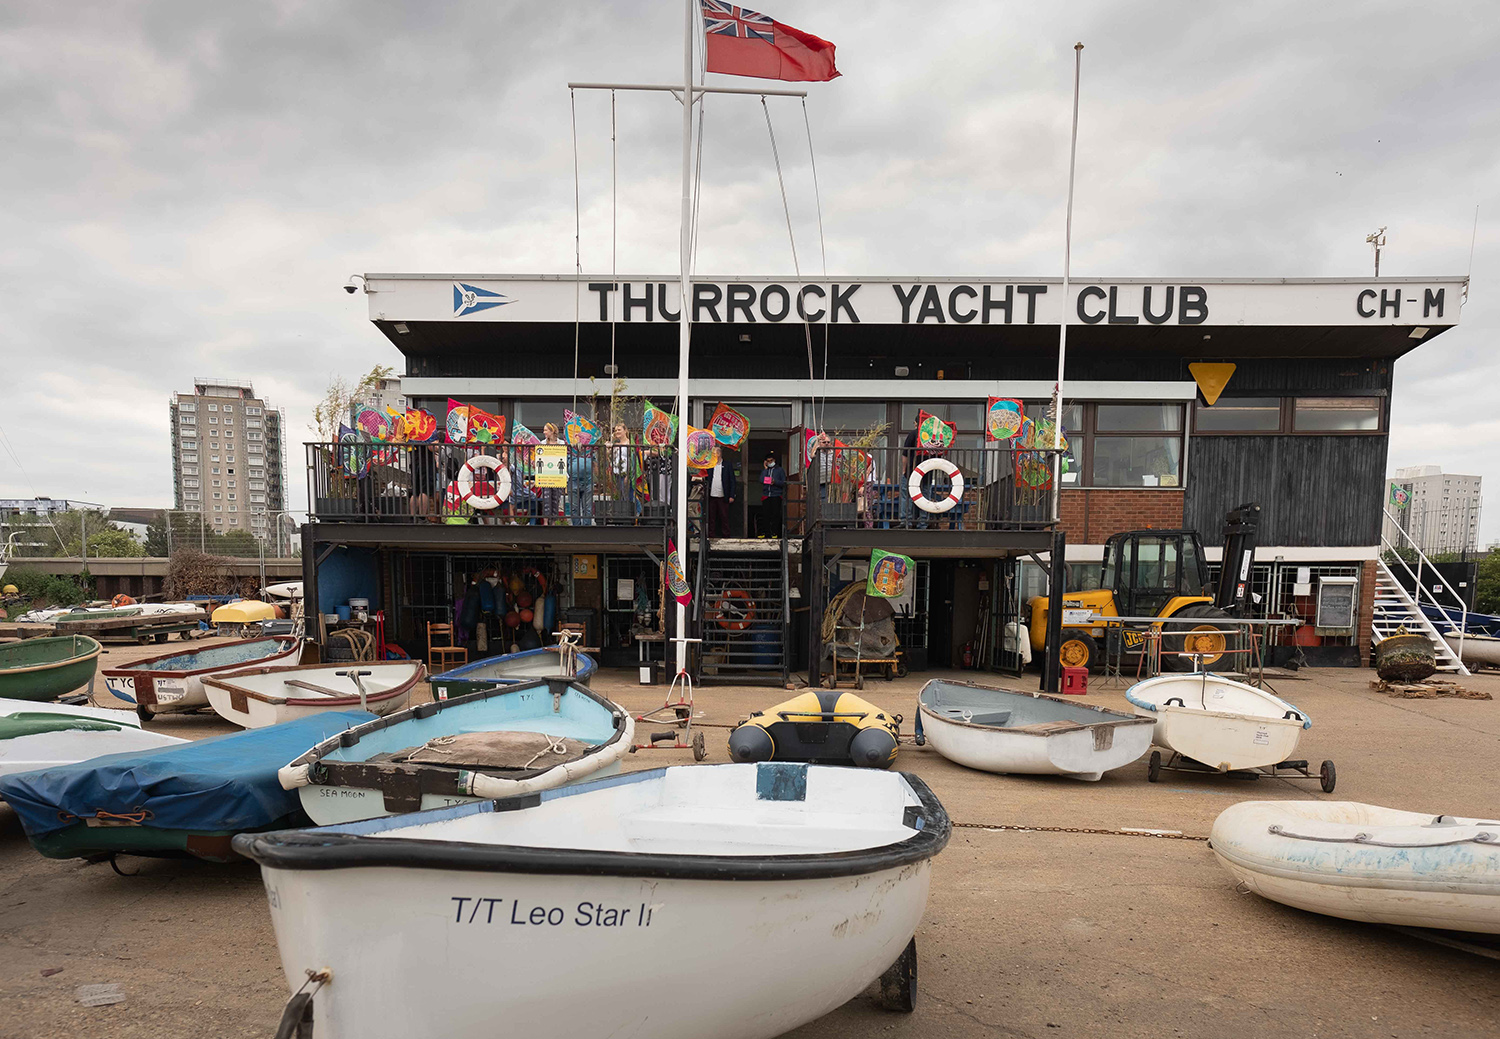 Outside view of Thurrock Yacht Club with landed sailing dinghies in the foreground